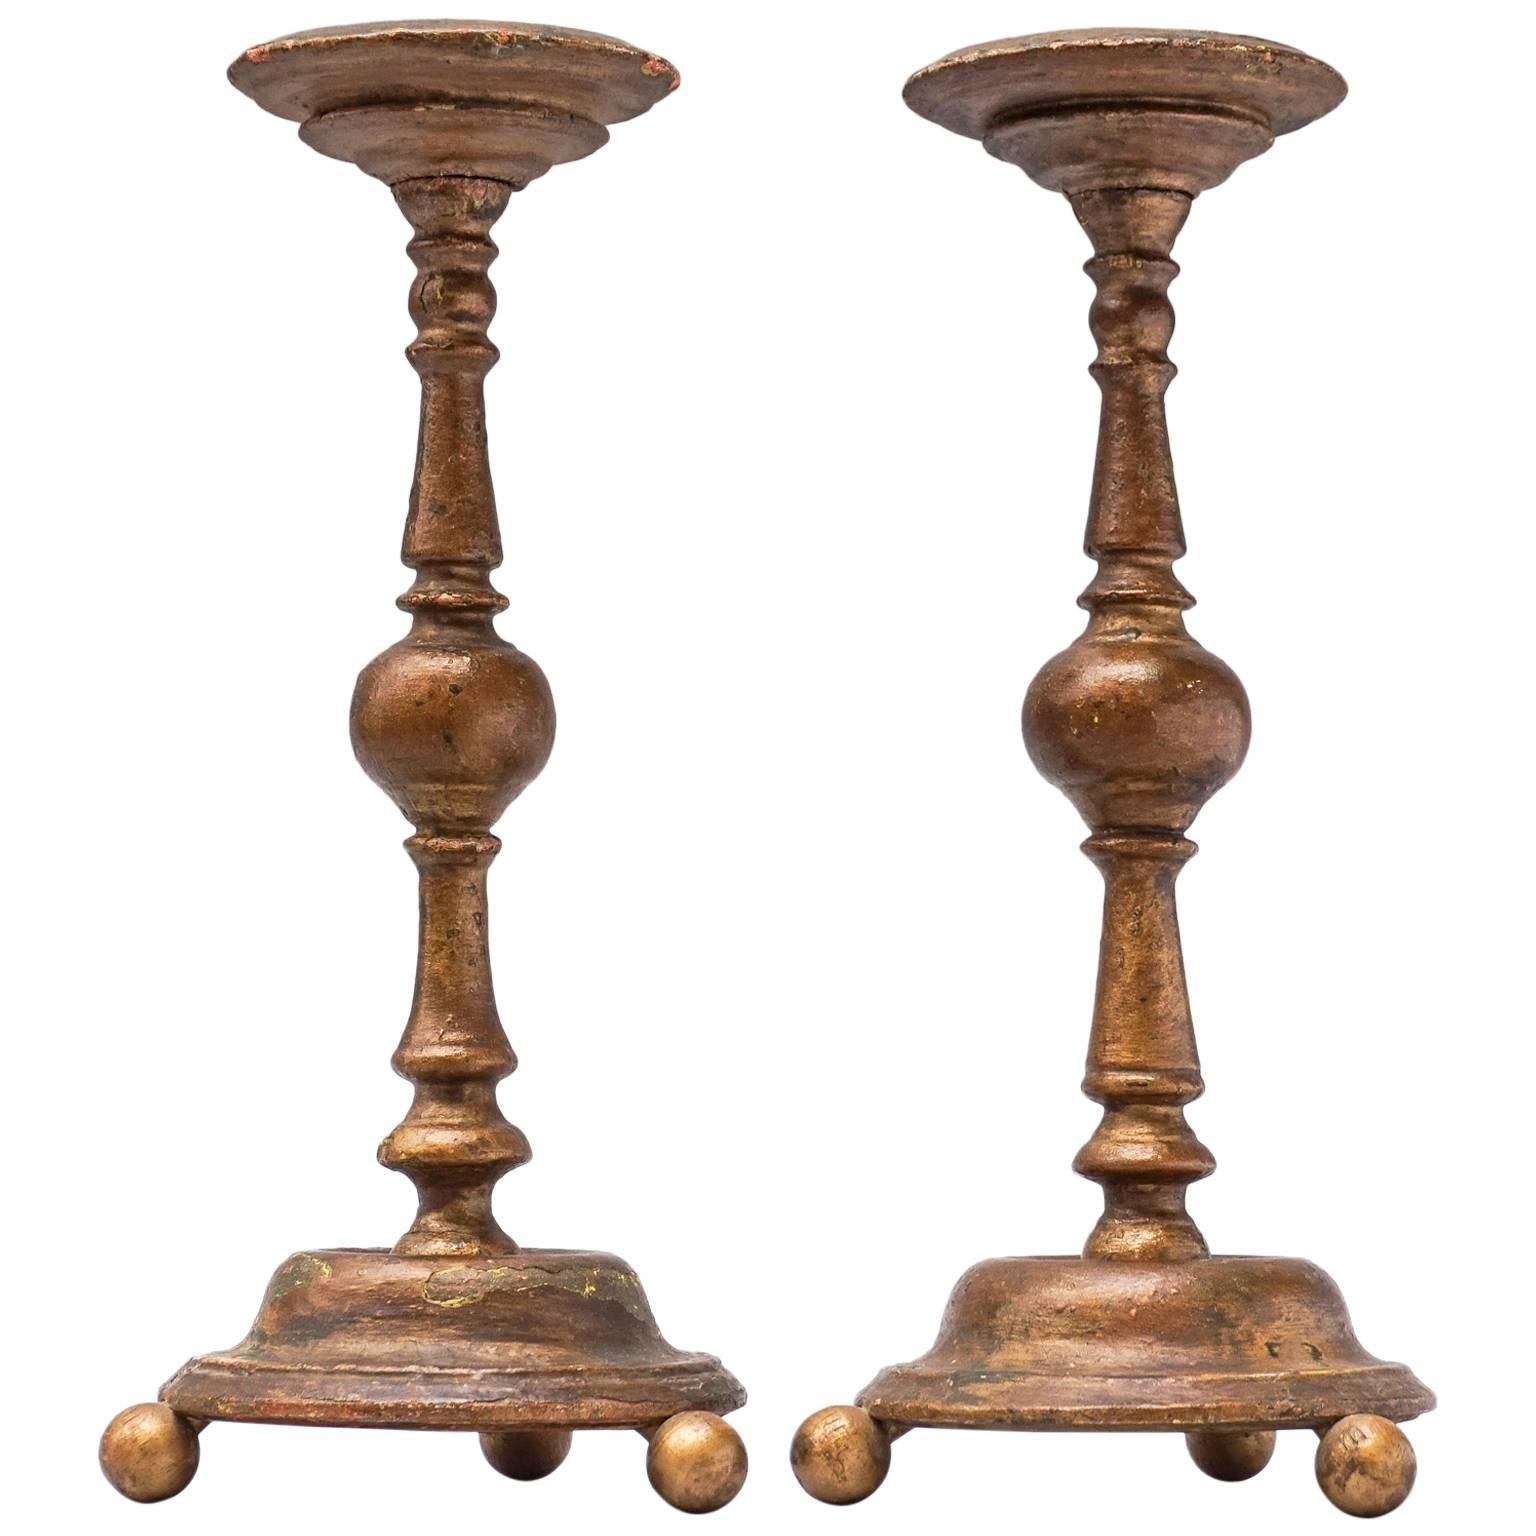 Two Large 18th C. French Polychromed Bois Doré or Gold Painted Wood Candlesticks For Sale